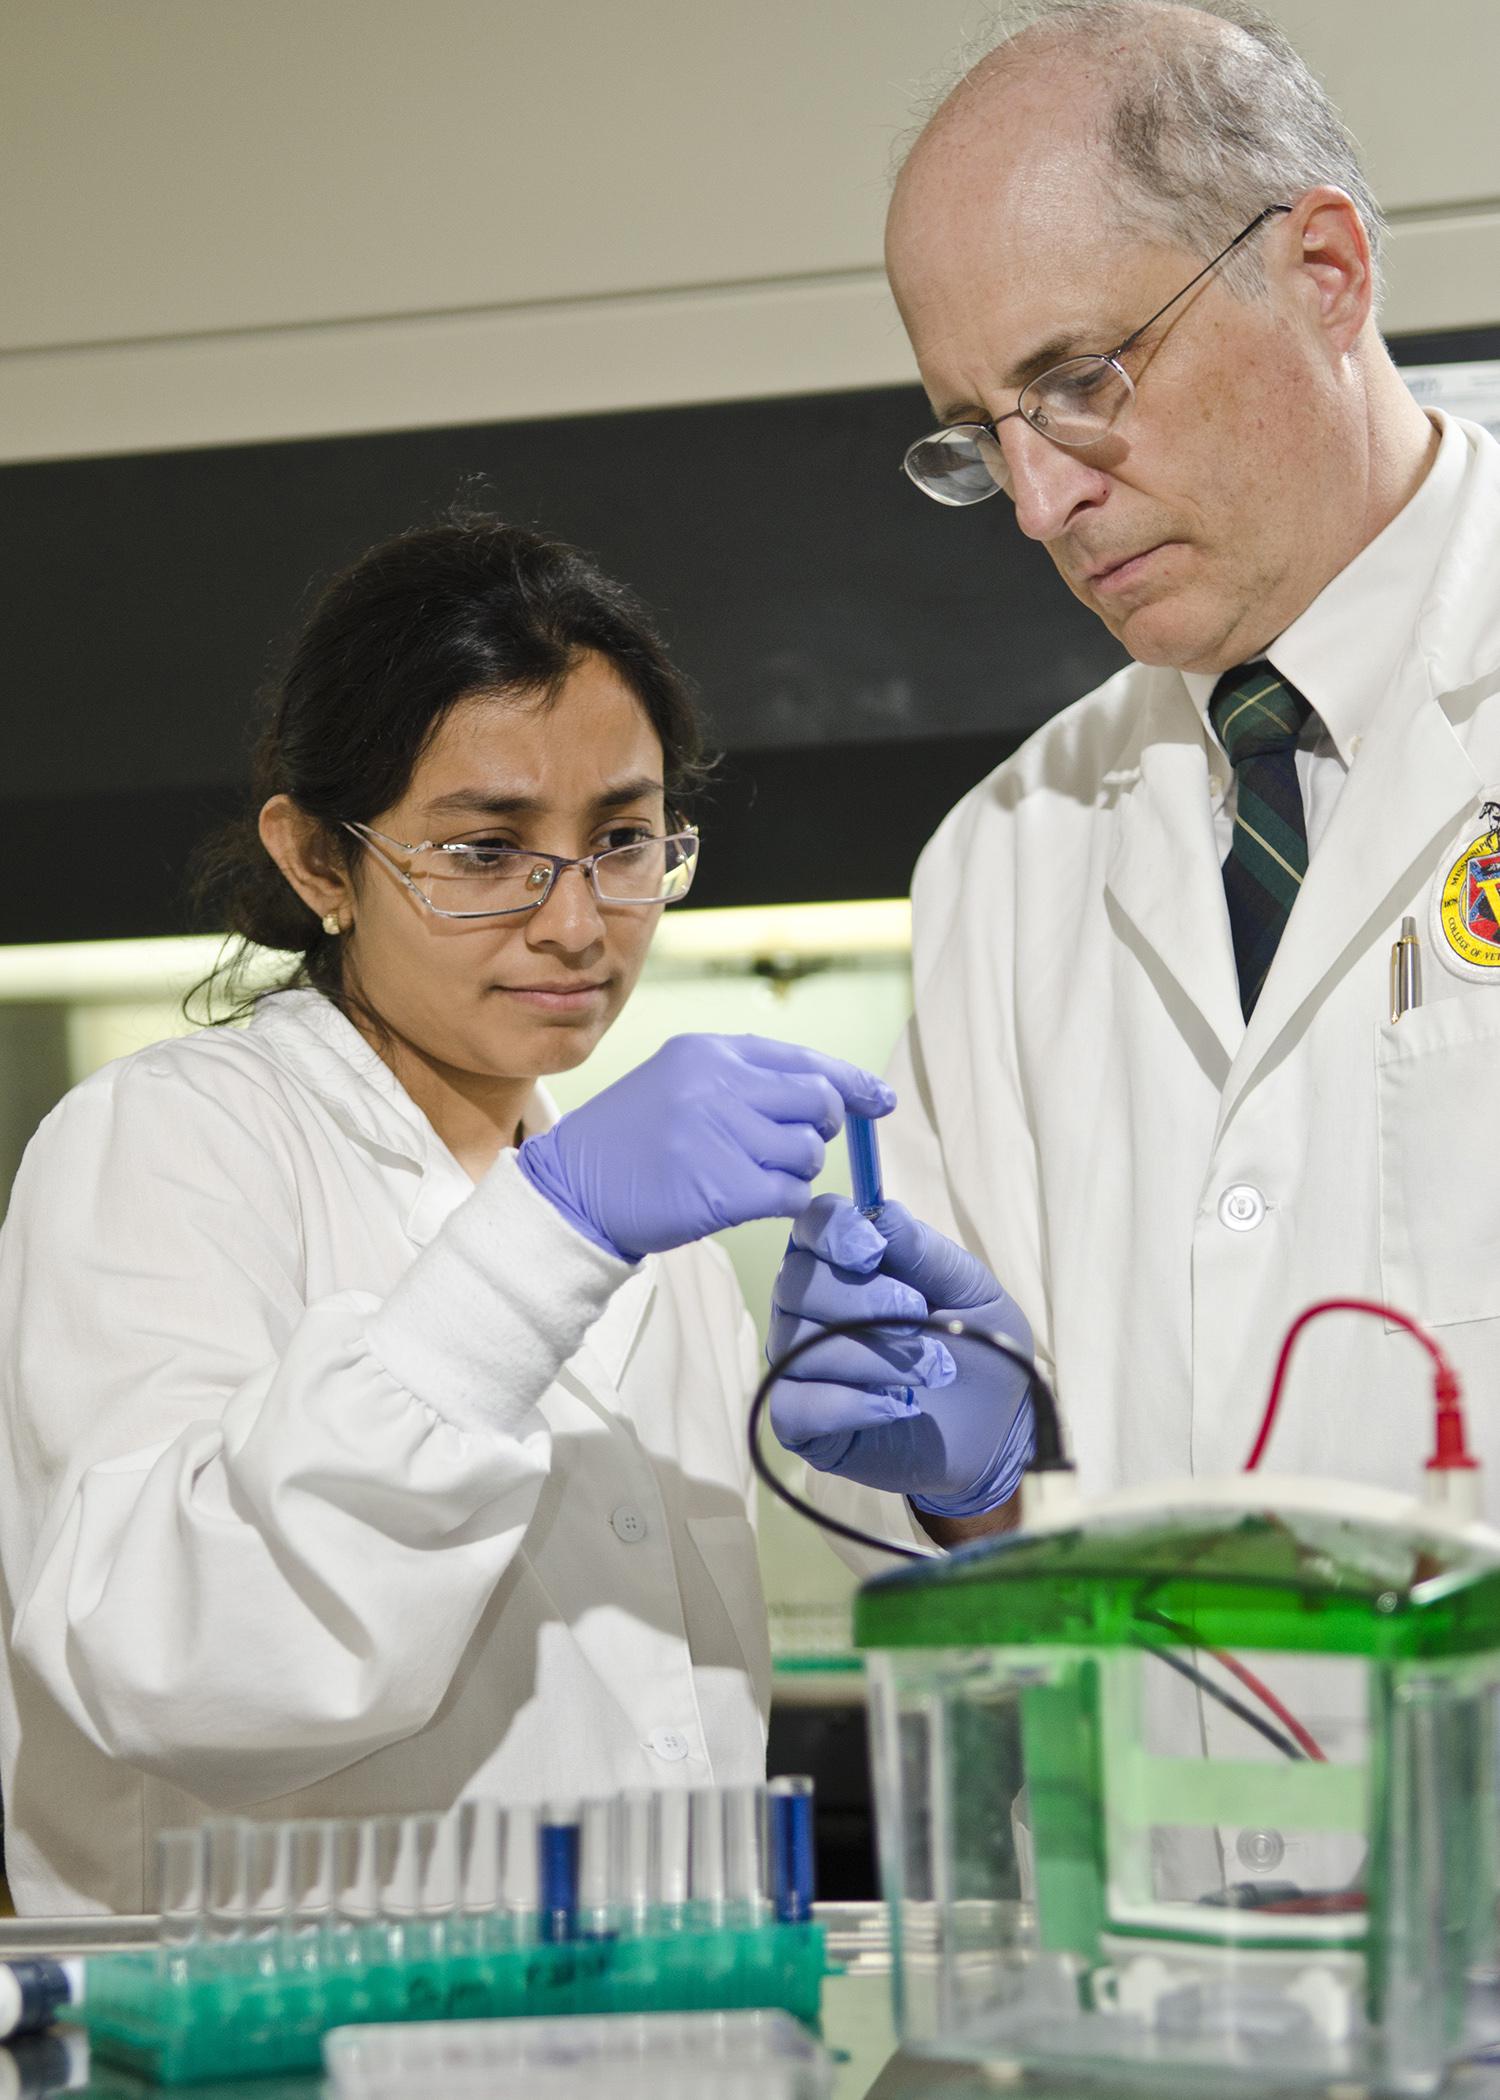 At the Mississippi State University College of Veterinary Medicine, Lakshmi Narayana, a postdoctoral associate, and Dr. Cody Coyne, a professor of molecular pharmacology and immunology, research cancer therapies that target specific cells. (Photo by MSU College of Veterinary Medicine/Tom Thompson)